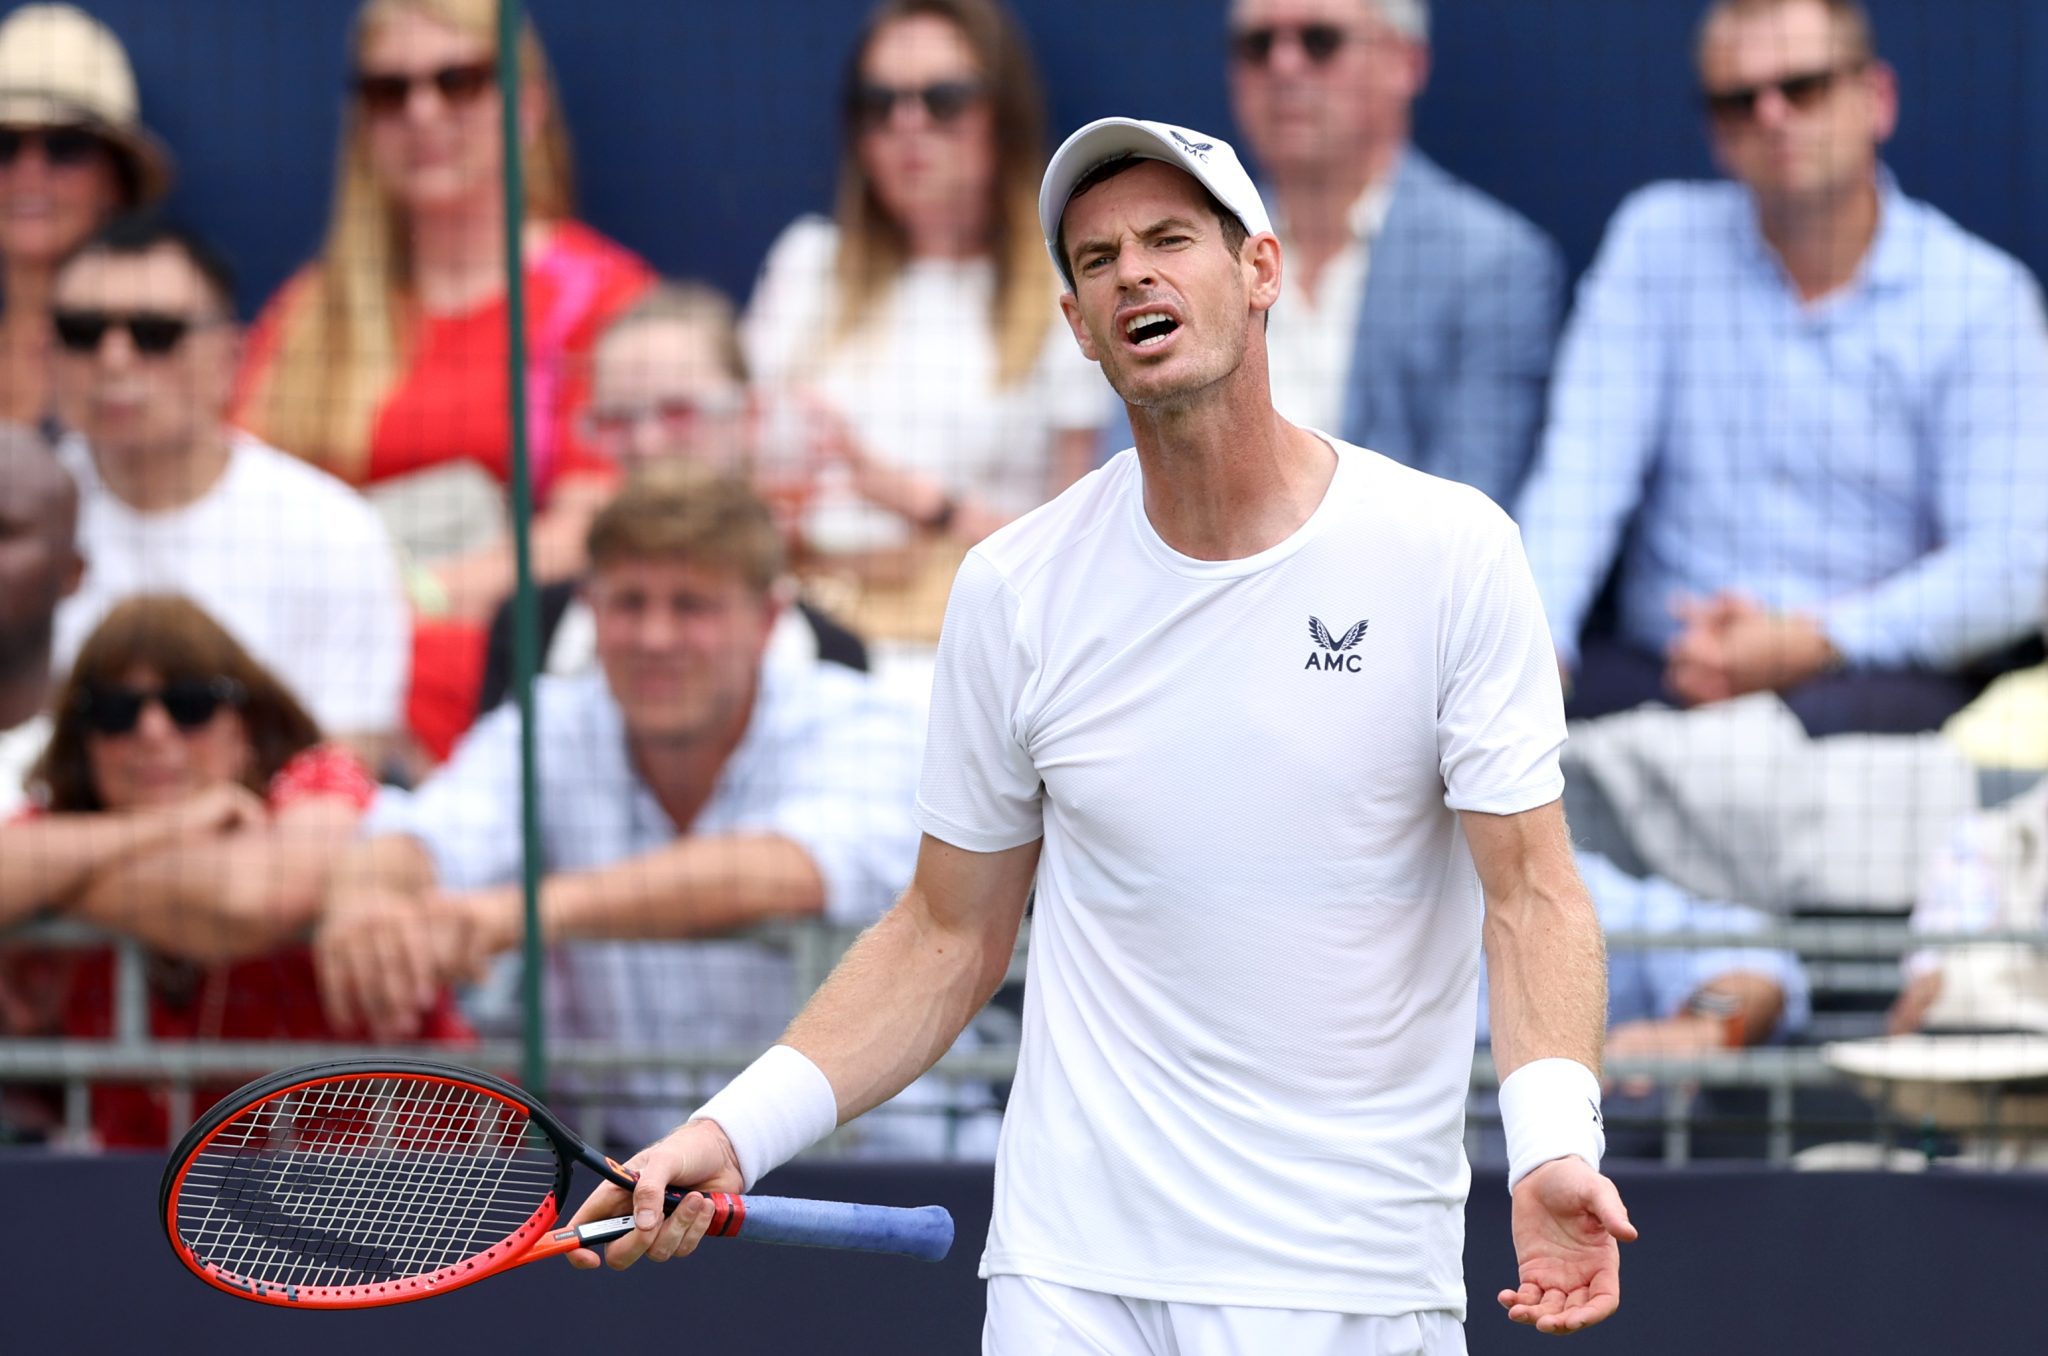 Andy Murray beaten in straight sets by Holger Rune in final Wimbledon tune-up